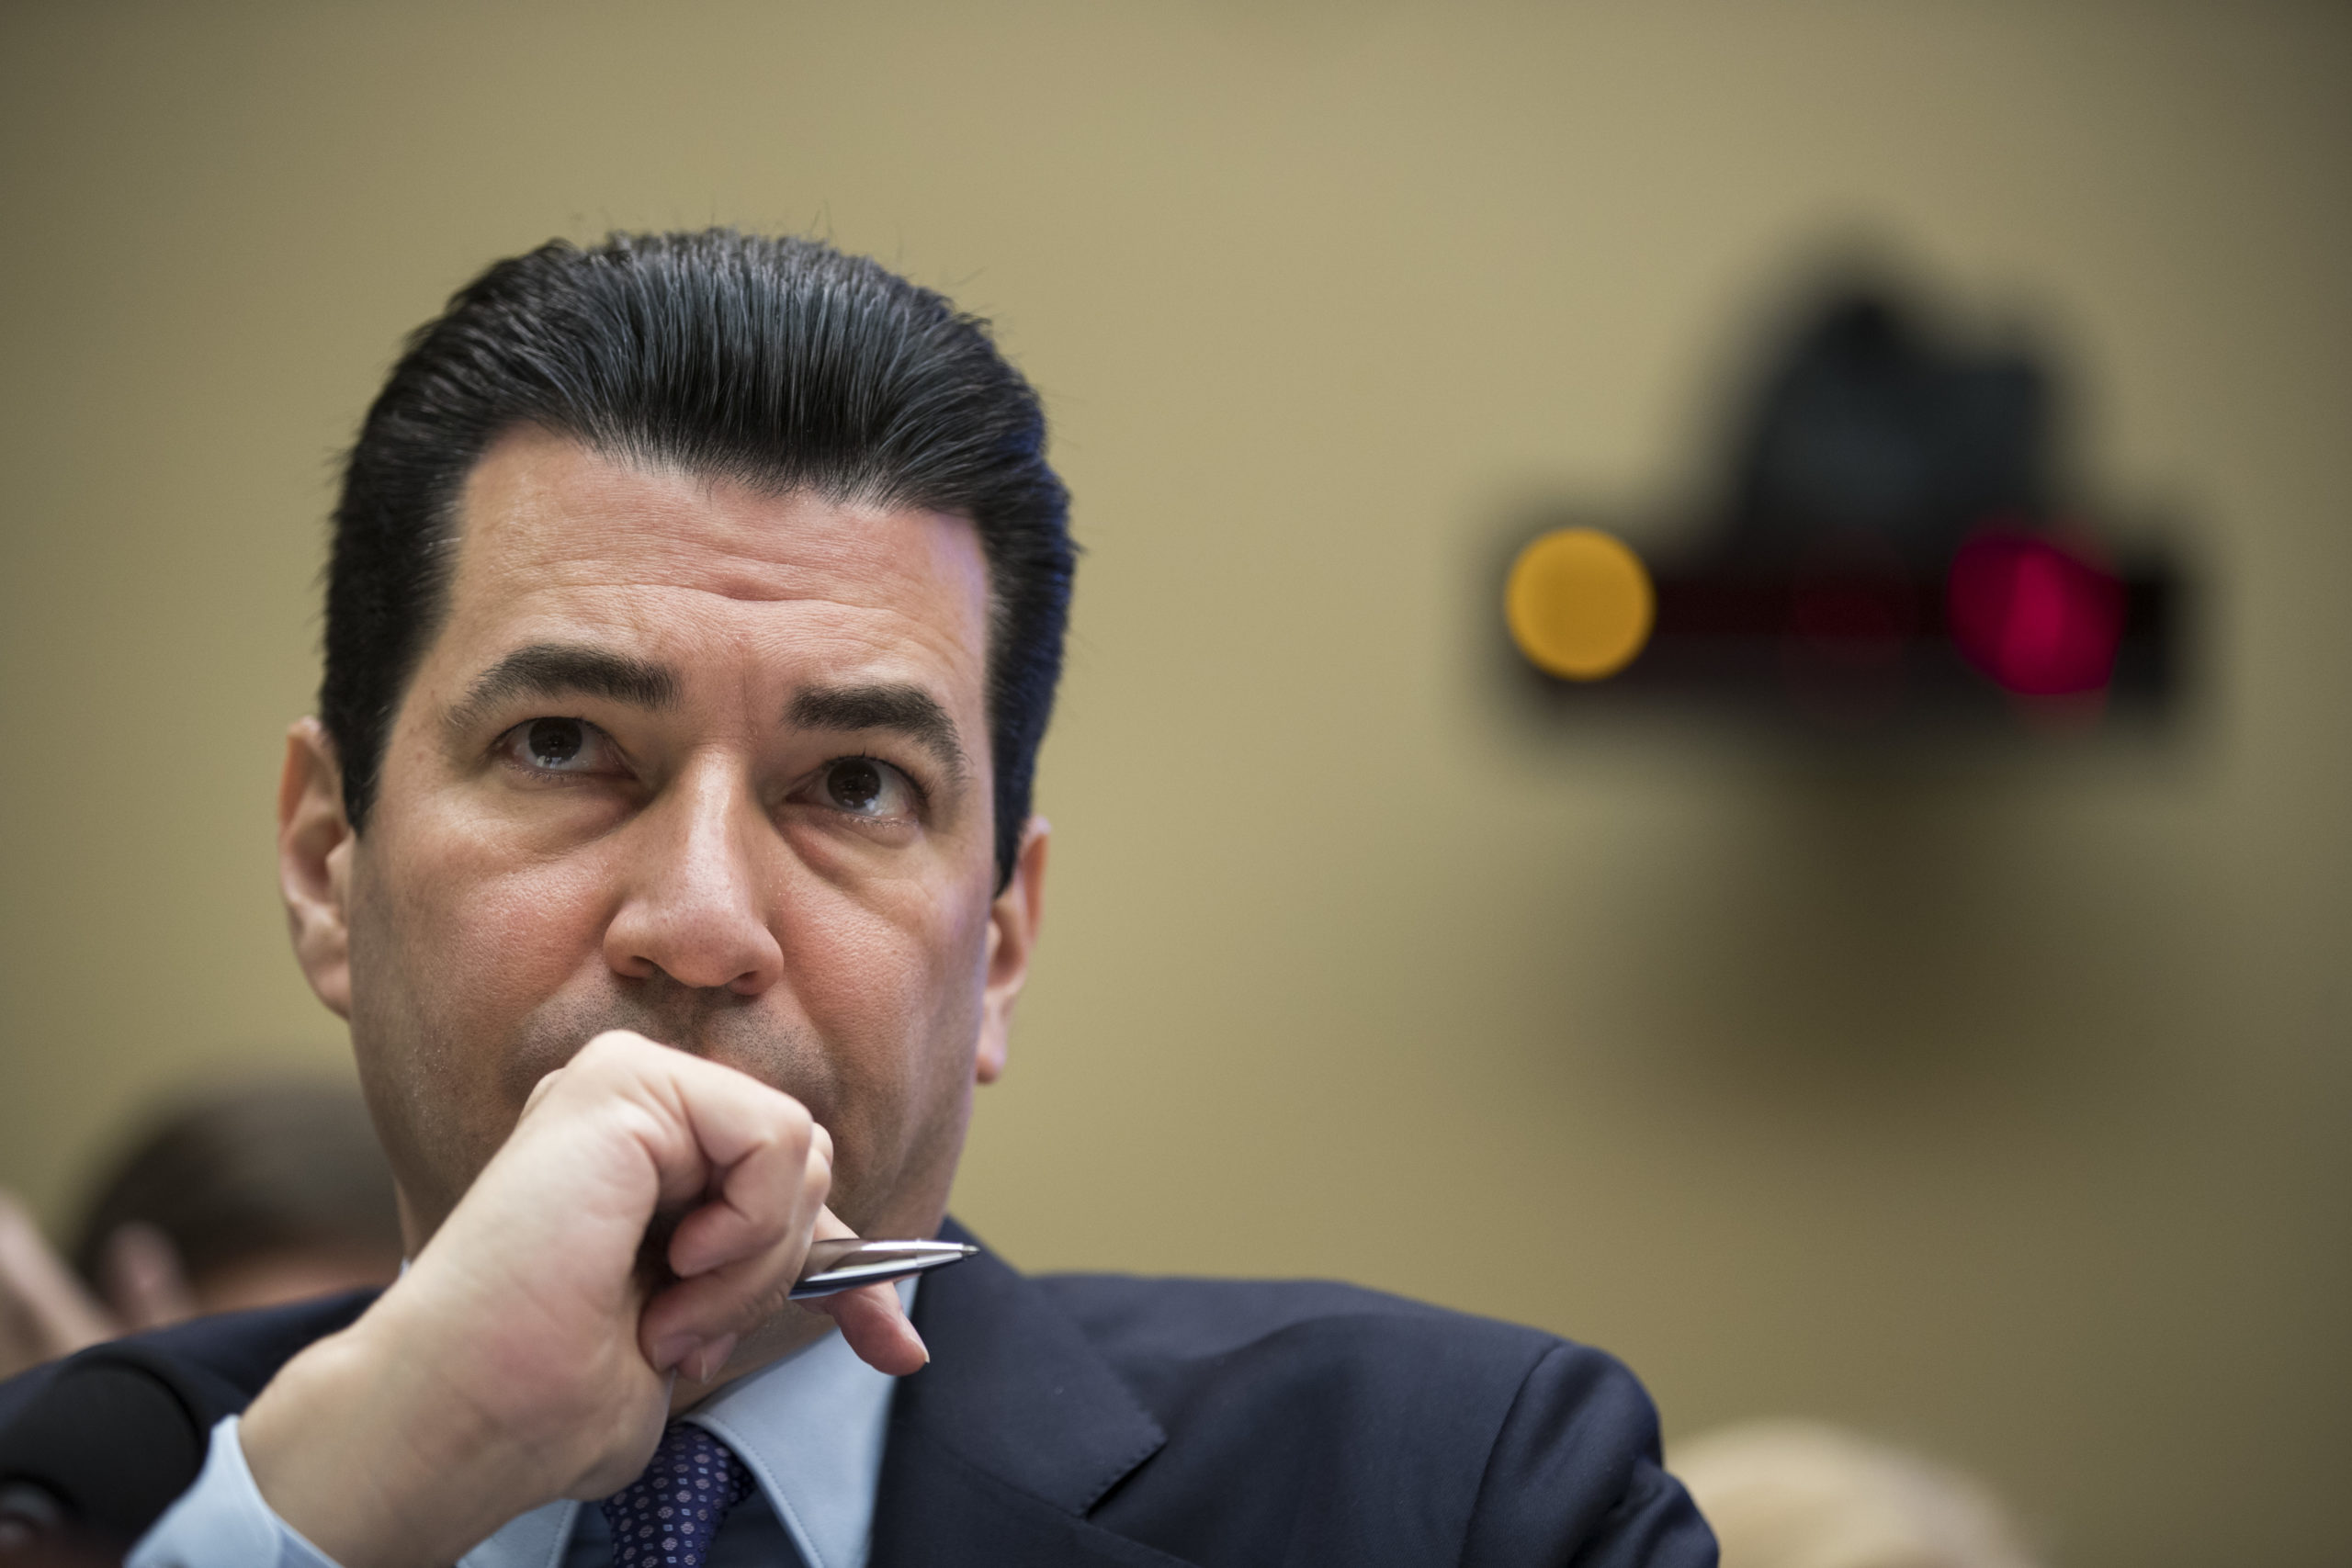 Dr. Scott Gottlieb, former commissioner of the Food and Drug Administration, testifies during a House hearing in 2017. (Drew Angerer/Getty Images)